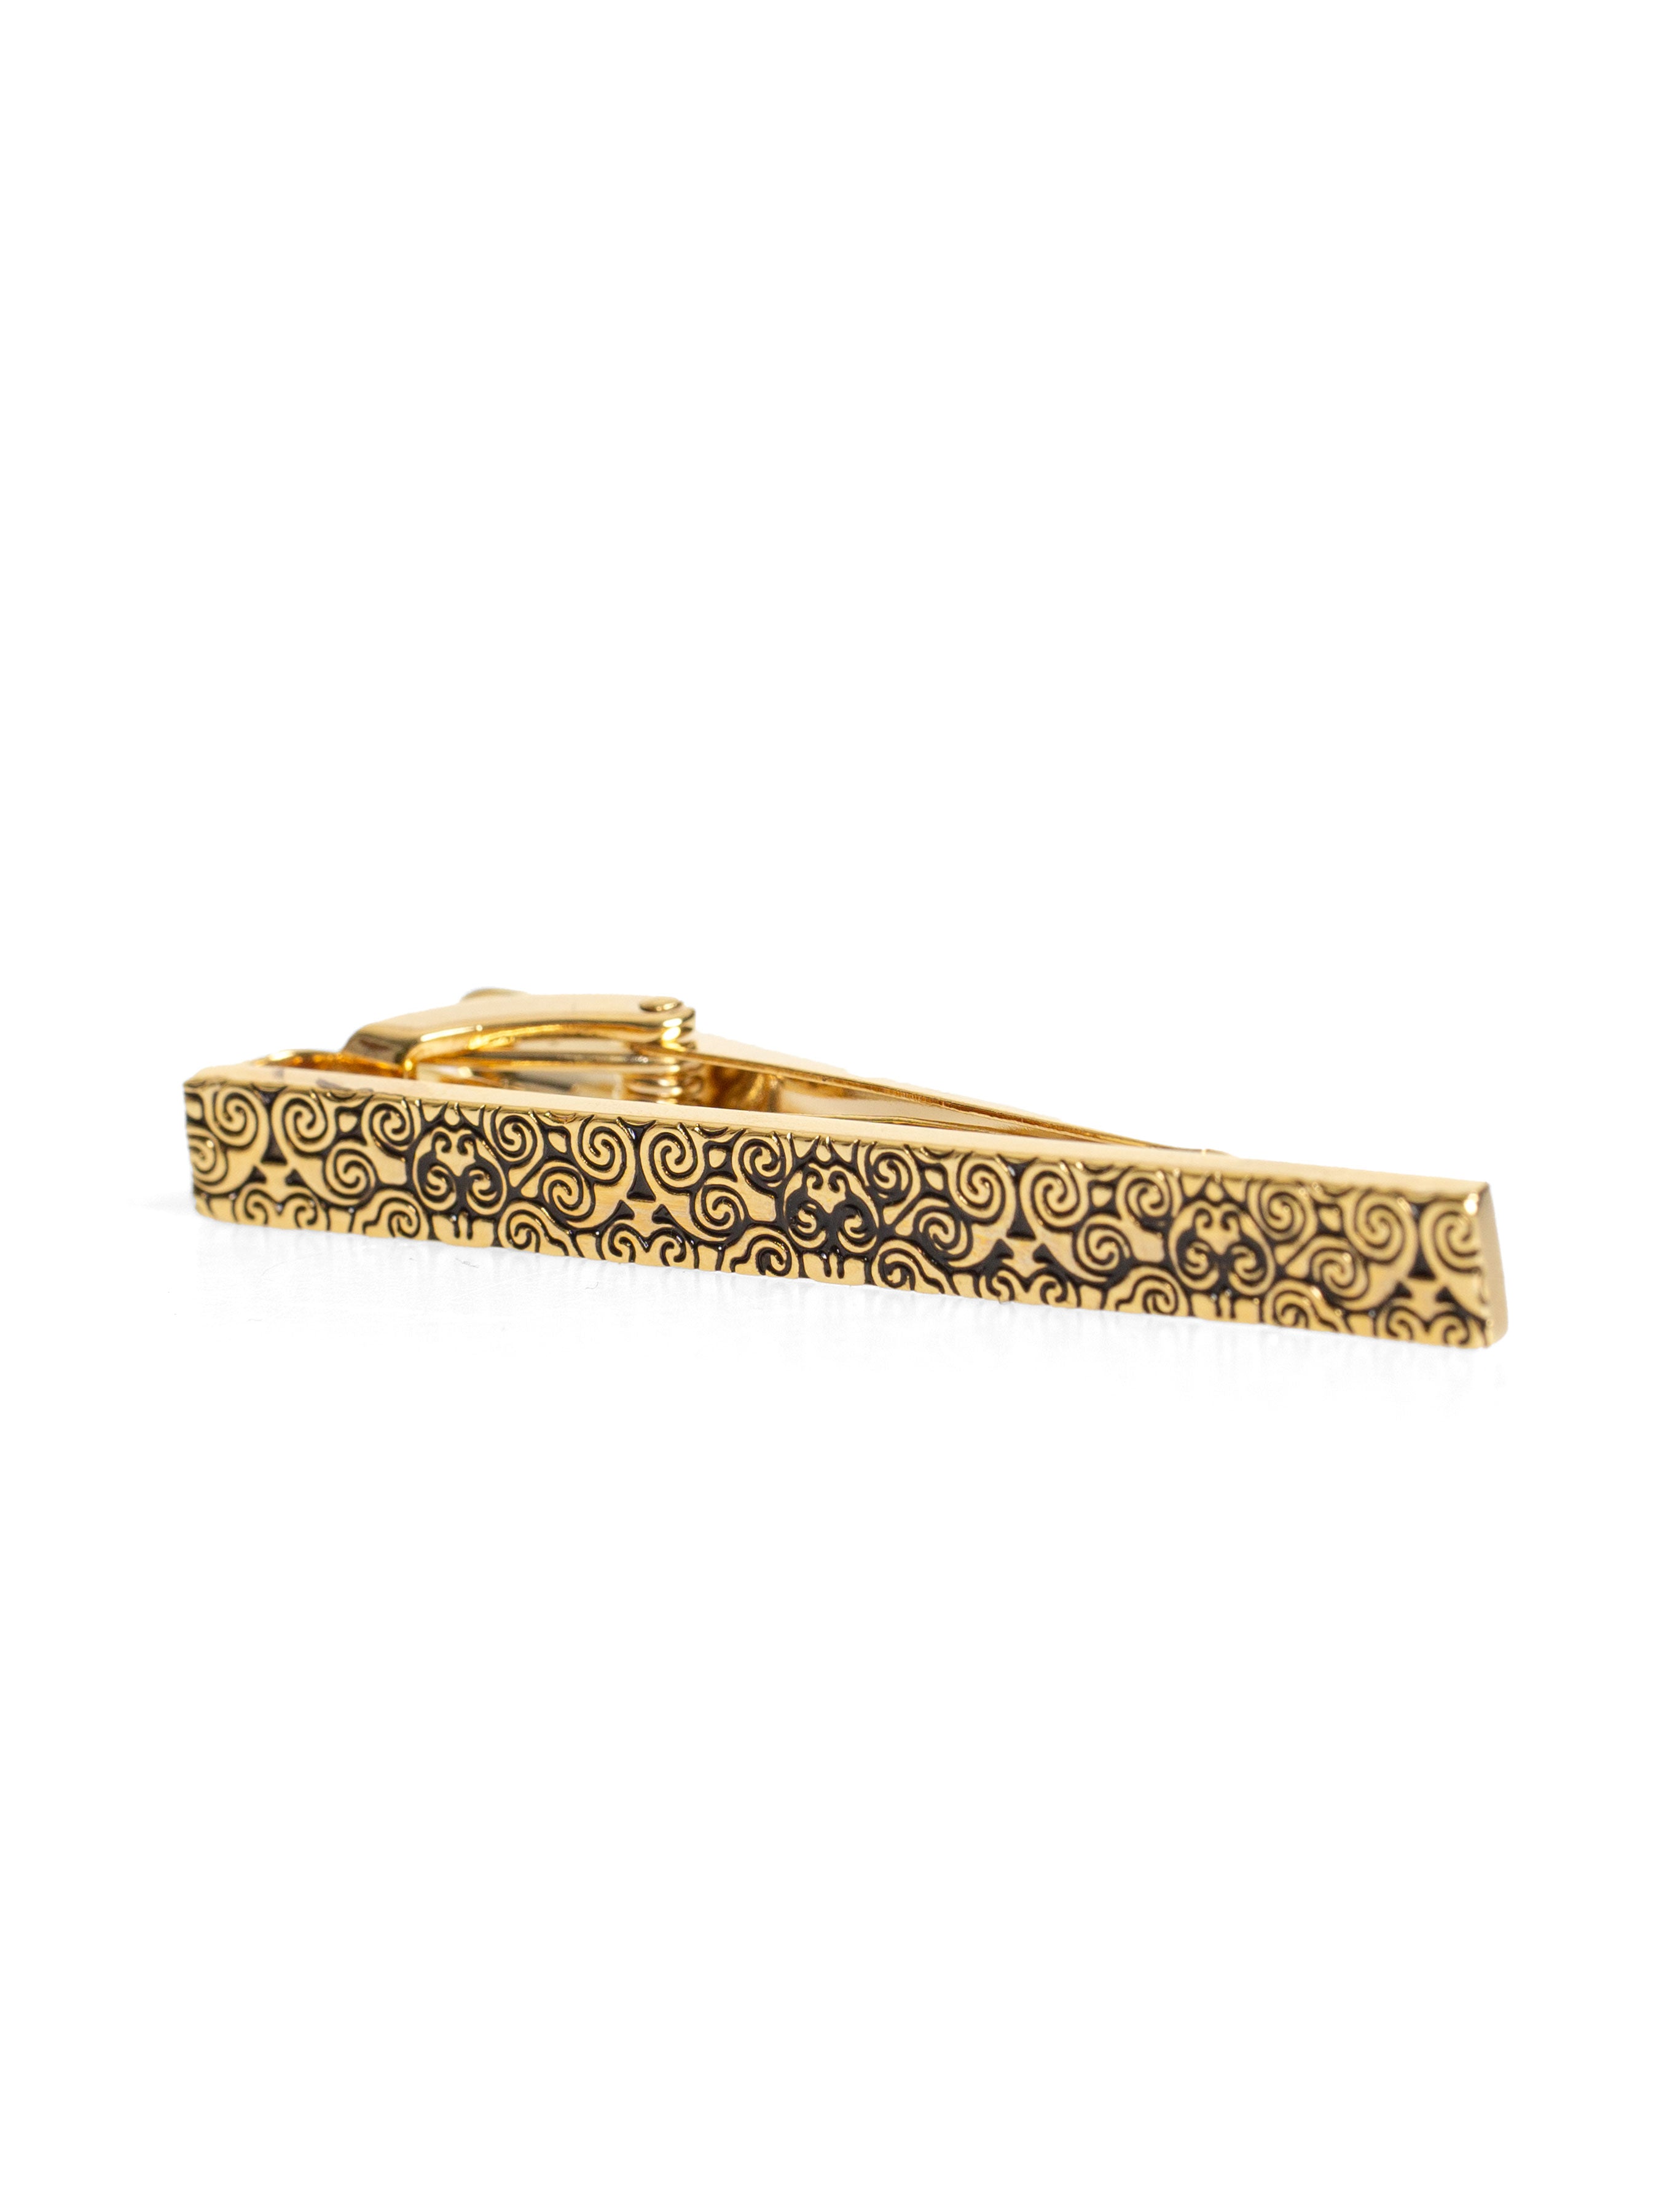 Tie Clip - Enzo Spiral Gold - Zeve Shoes